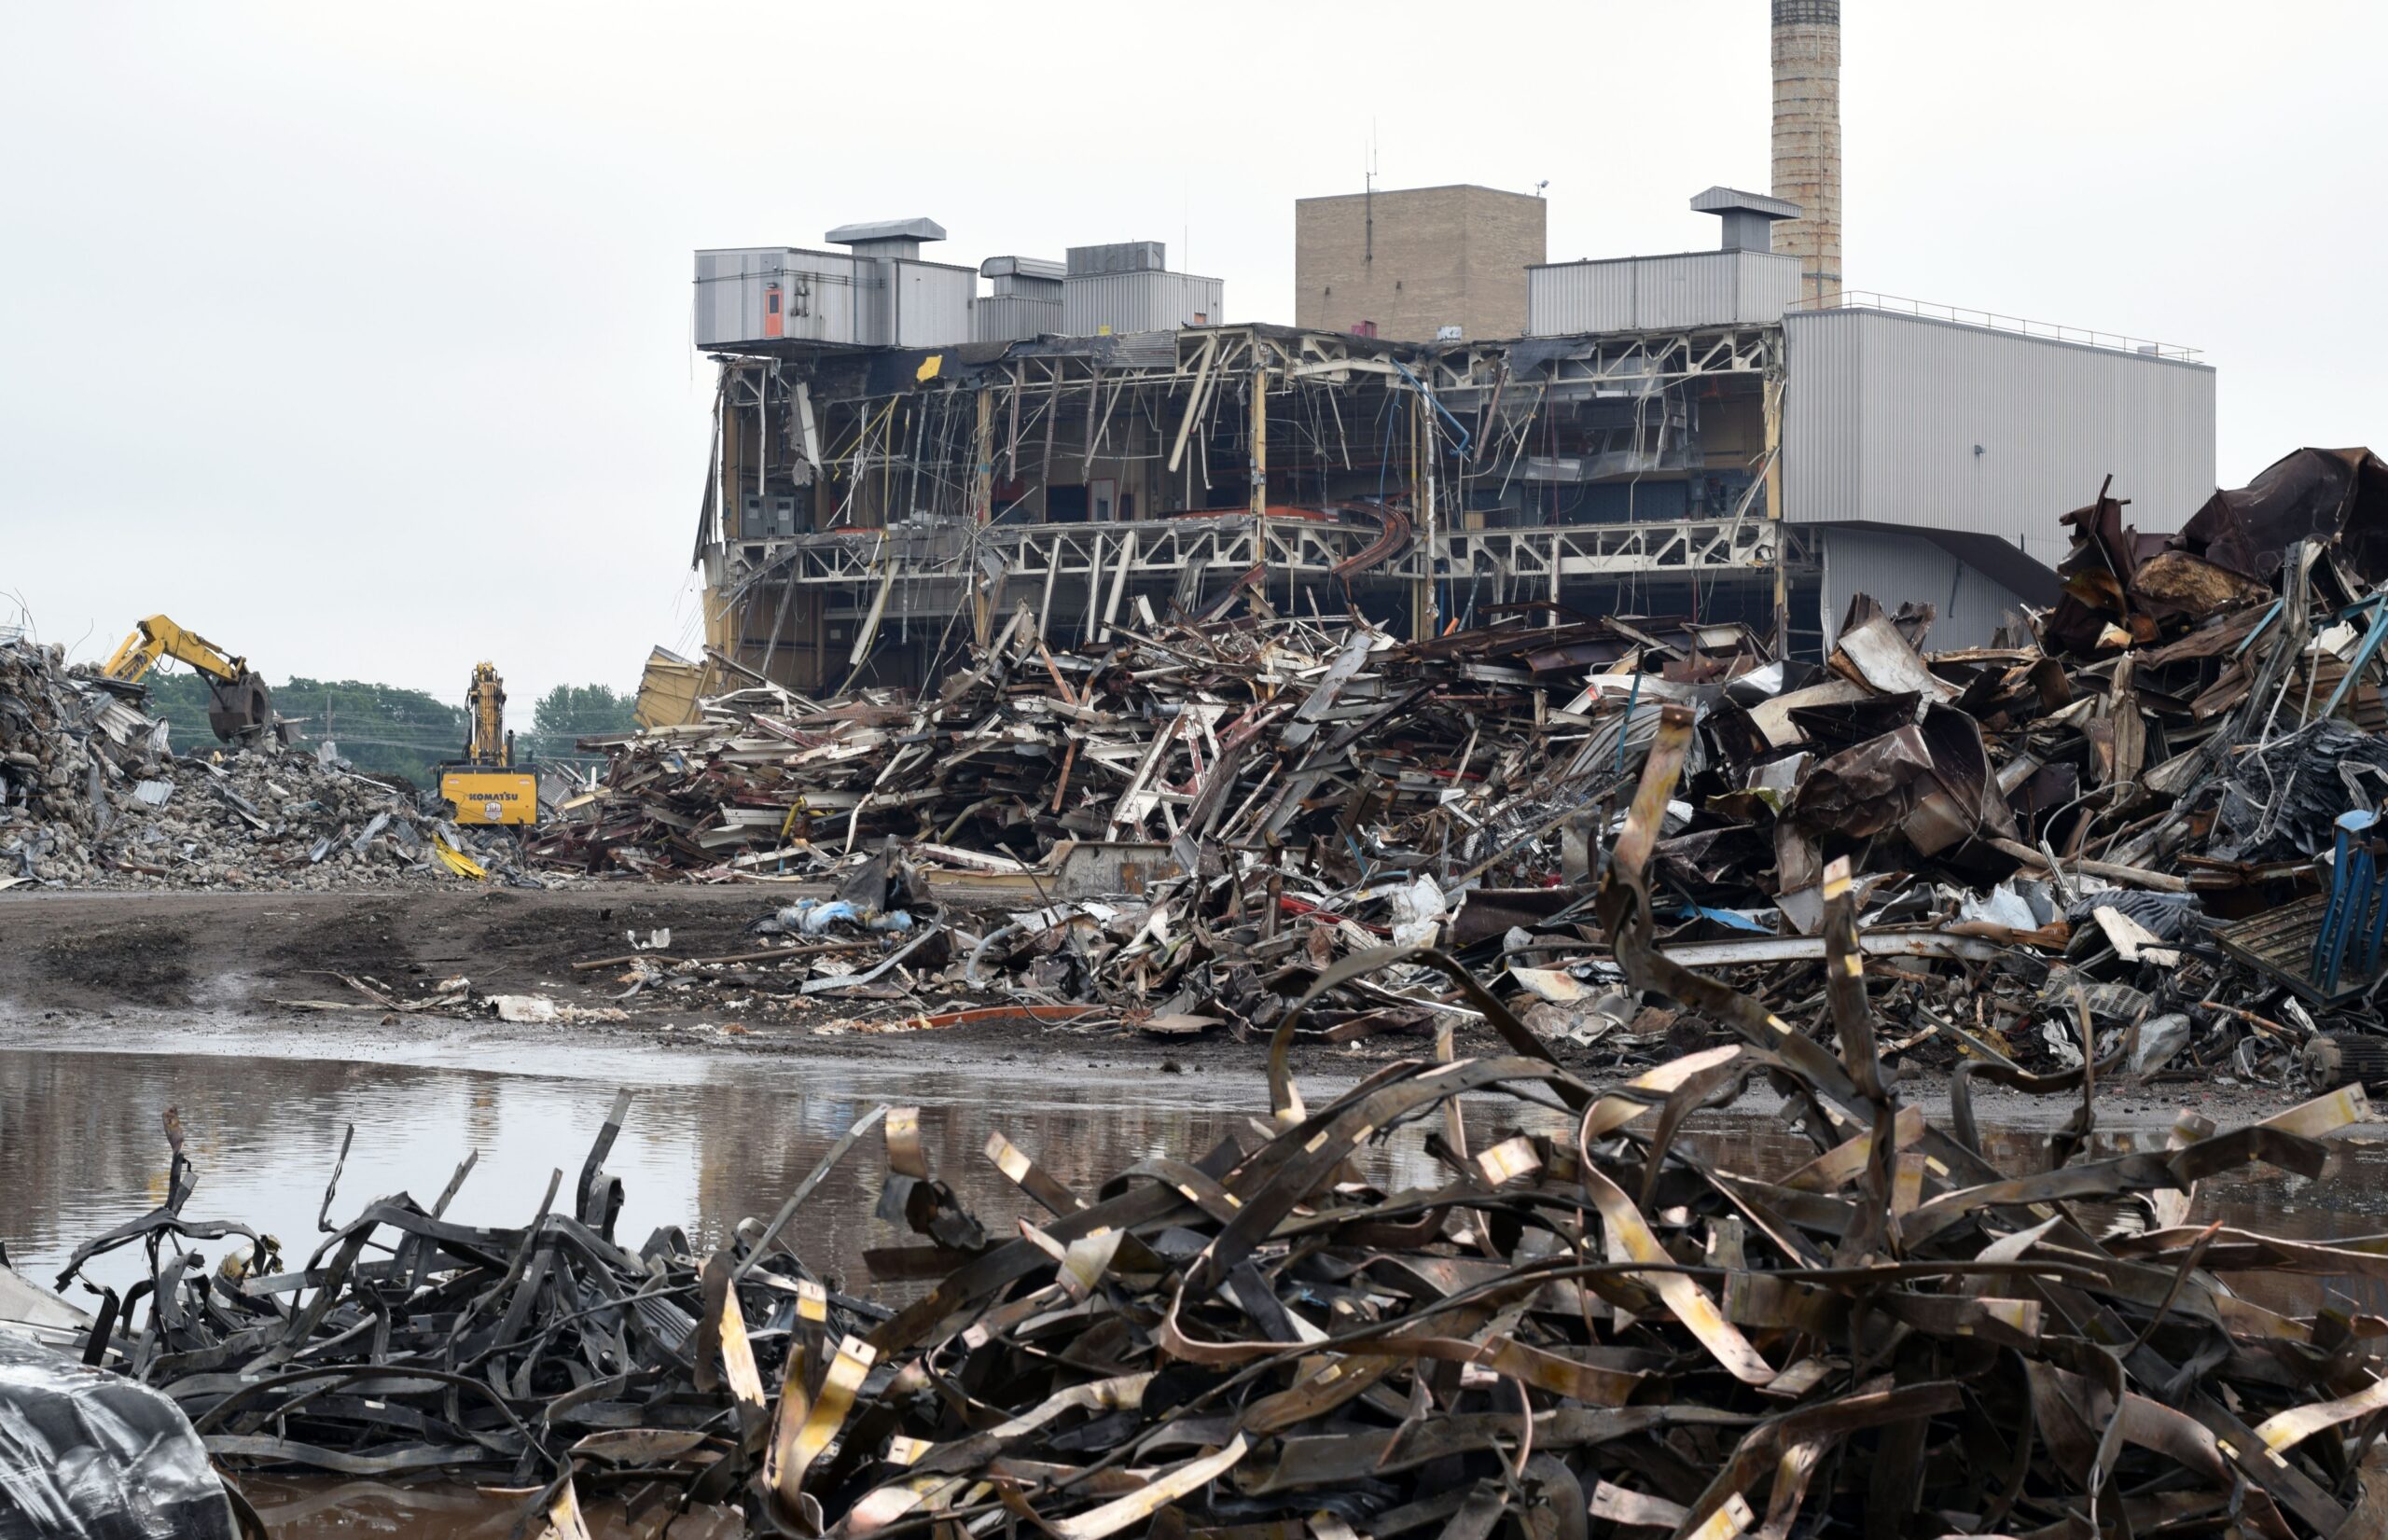 WEDC Awards $500K Grant To Help Cover Cost Of Janesville GM Plant Demolition